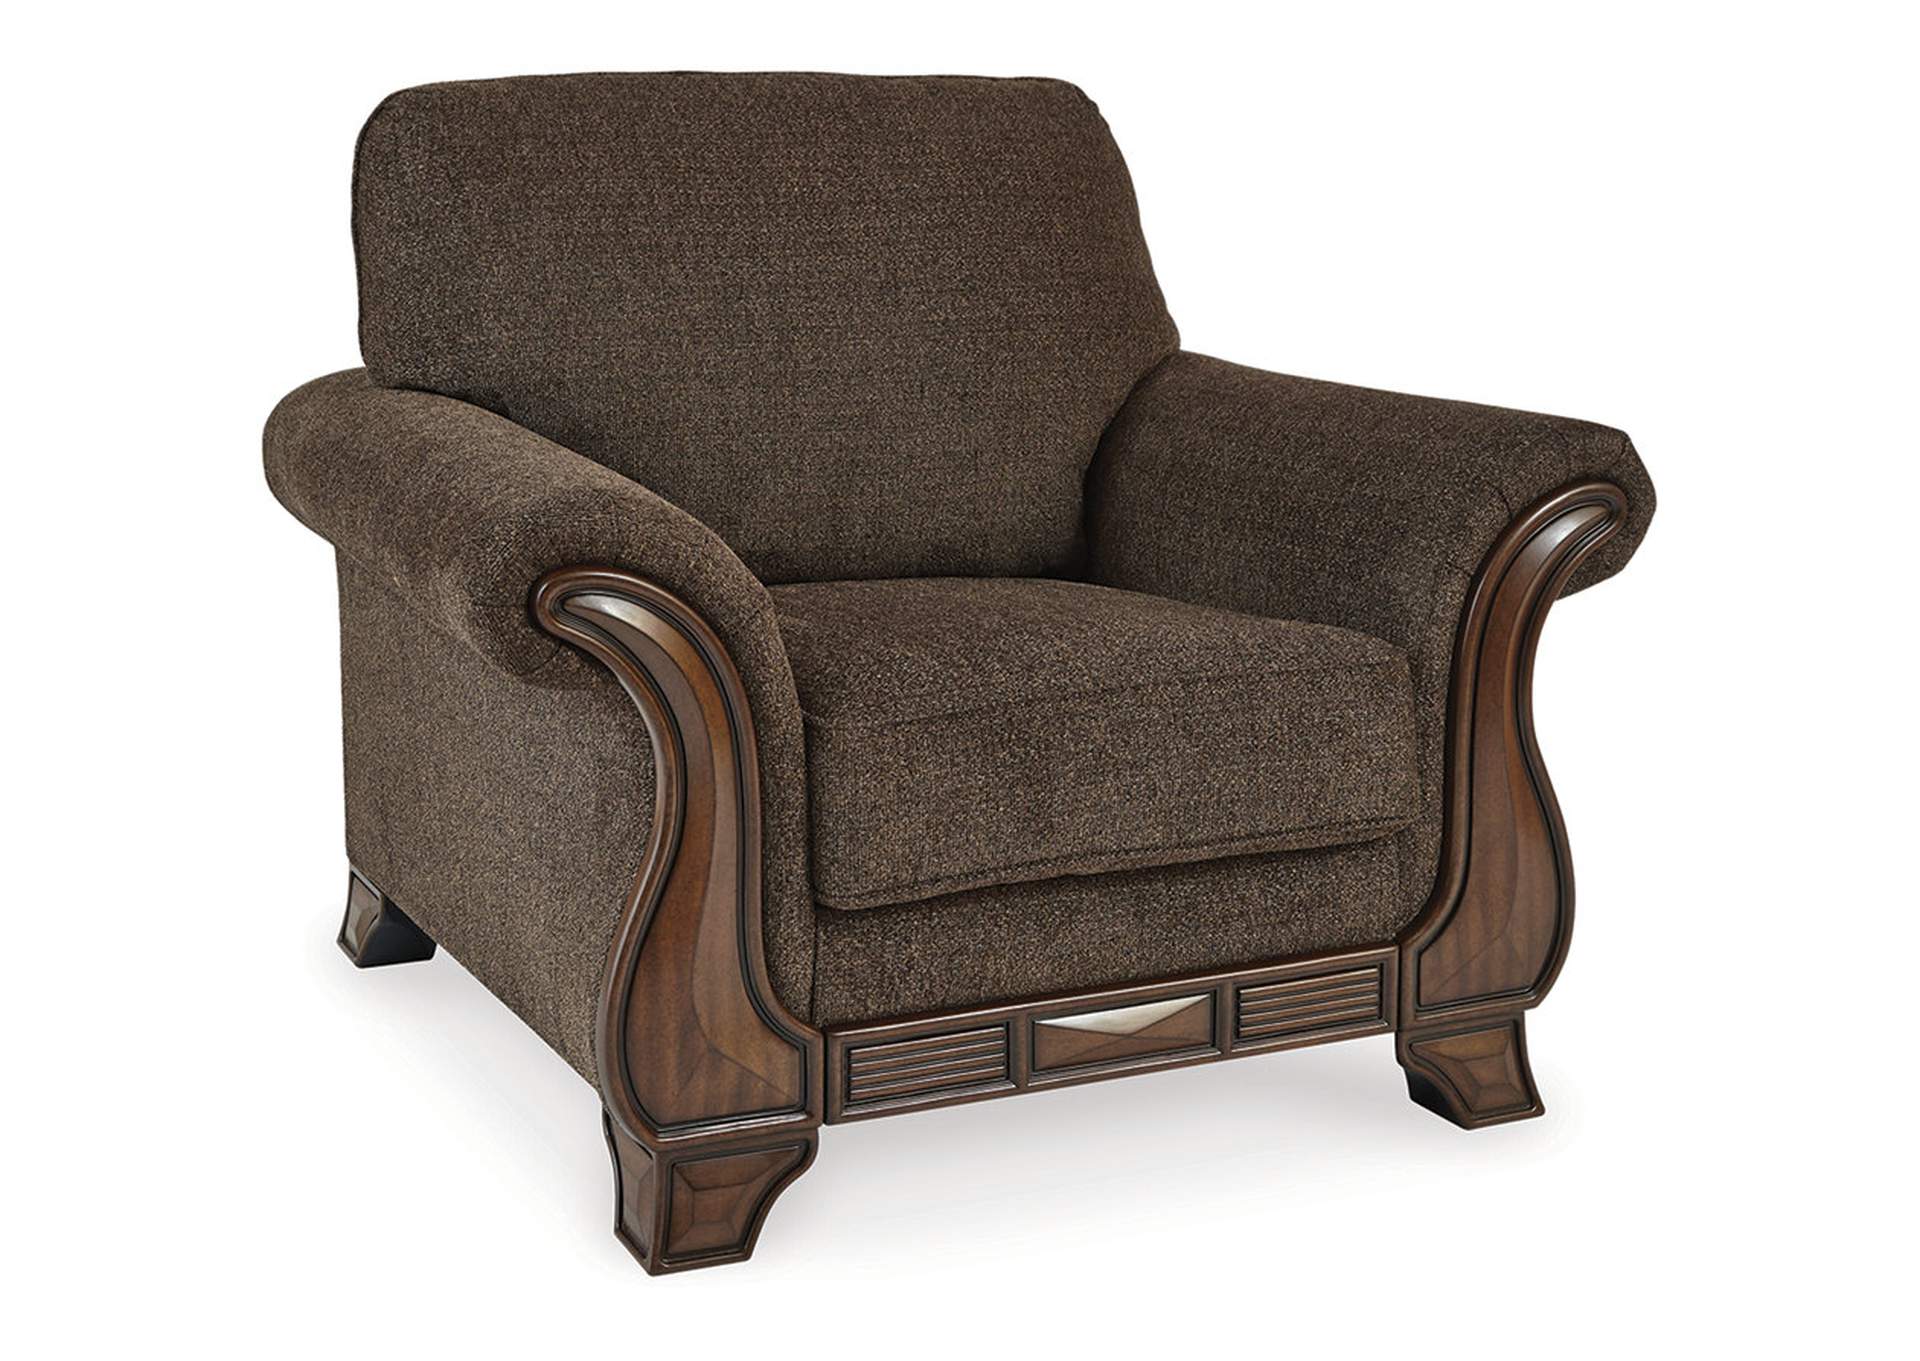 Miltonwood Chair Ashley Furniture Homestore Independently Owned And Operated By Partex Homestores Limited